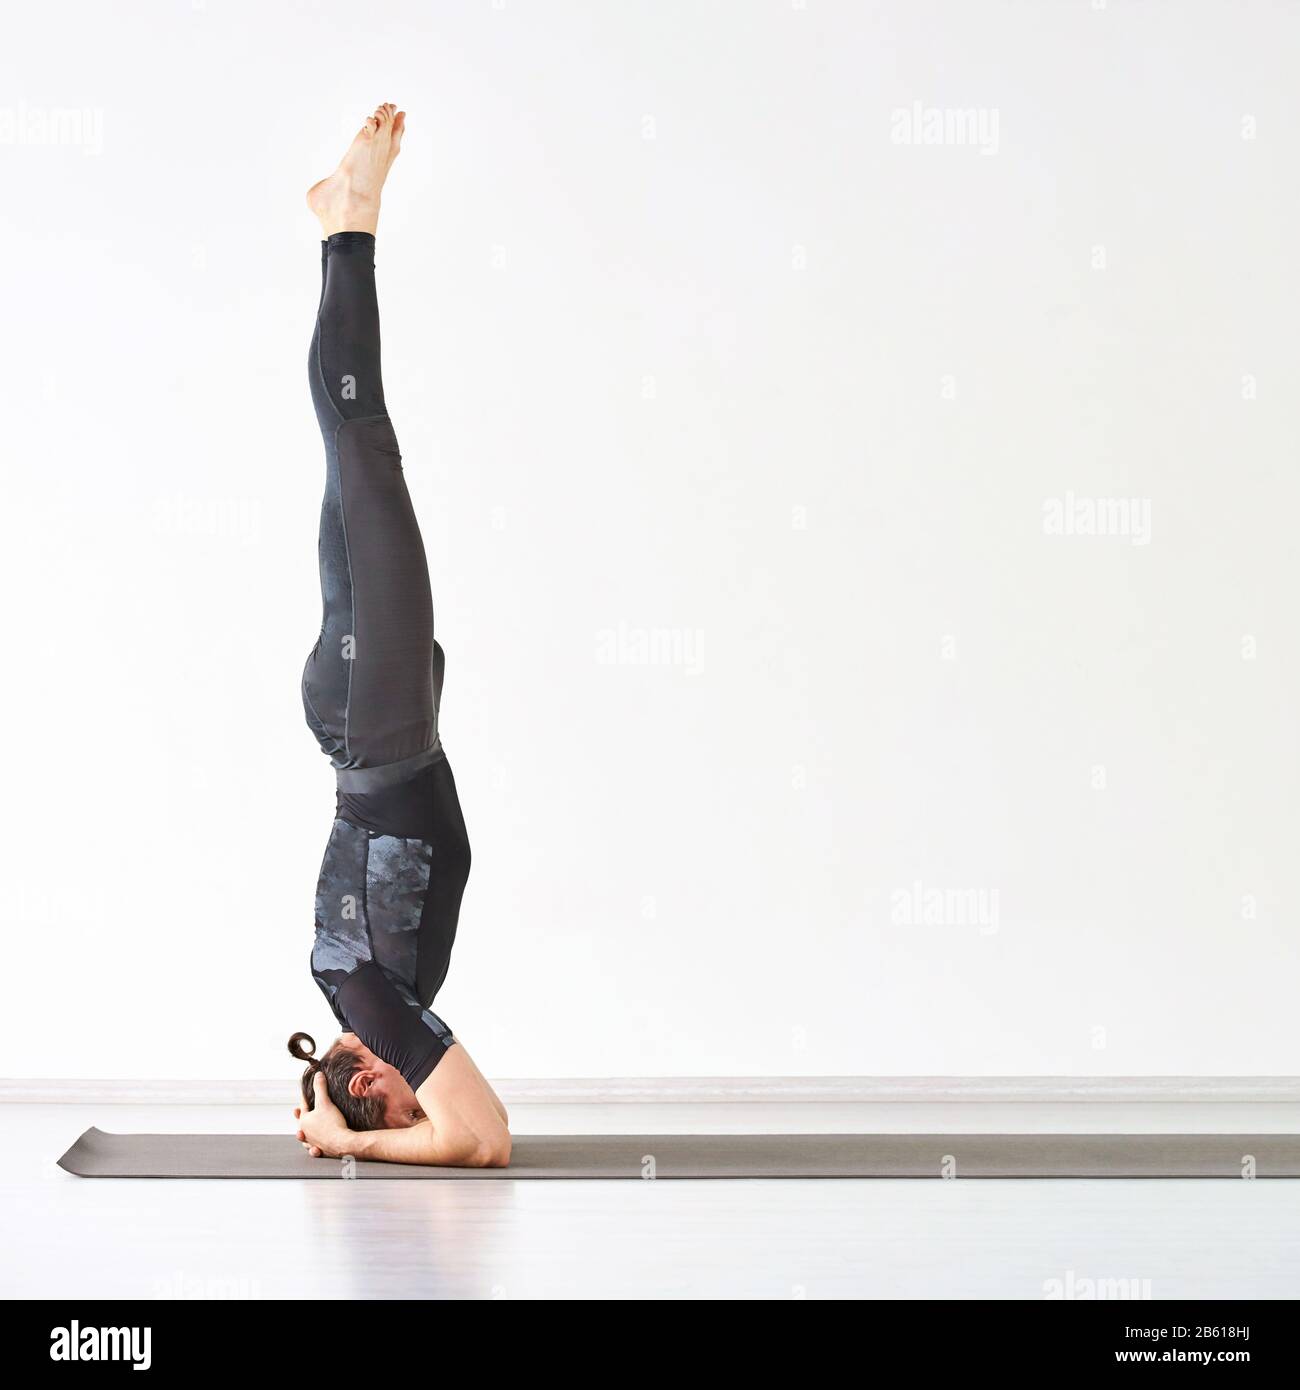 How to nail Sirsasana (Headstand) with these preparation poses | Marcia  Sharp Yoga